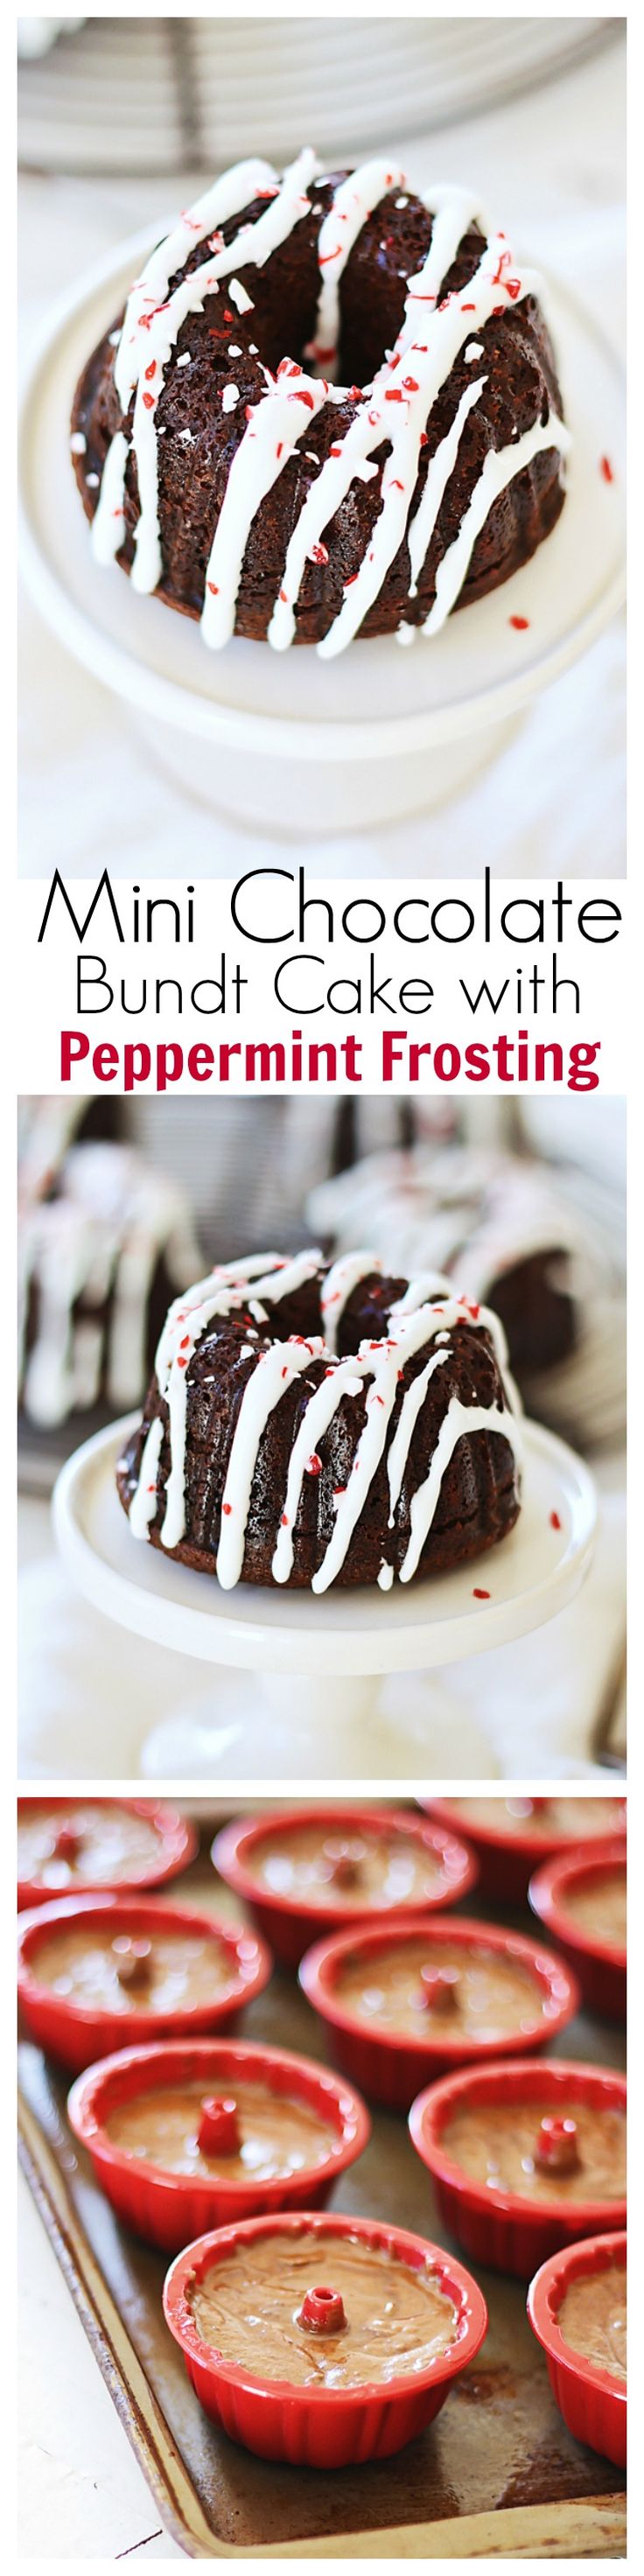 'Tis the season for rich chocolate bundt cake topped with sweet peppermint frosting. Easy recipe that you can try this holiday season for your family | rasamalaysia.com